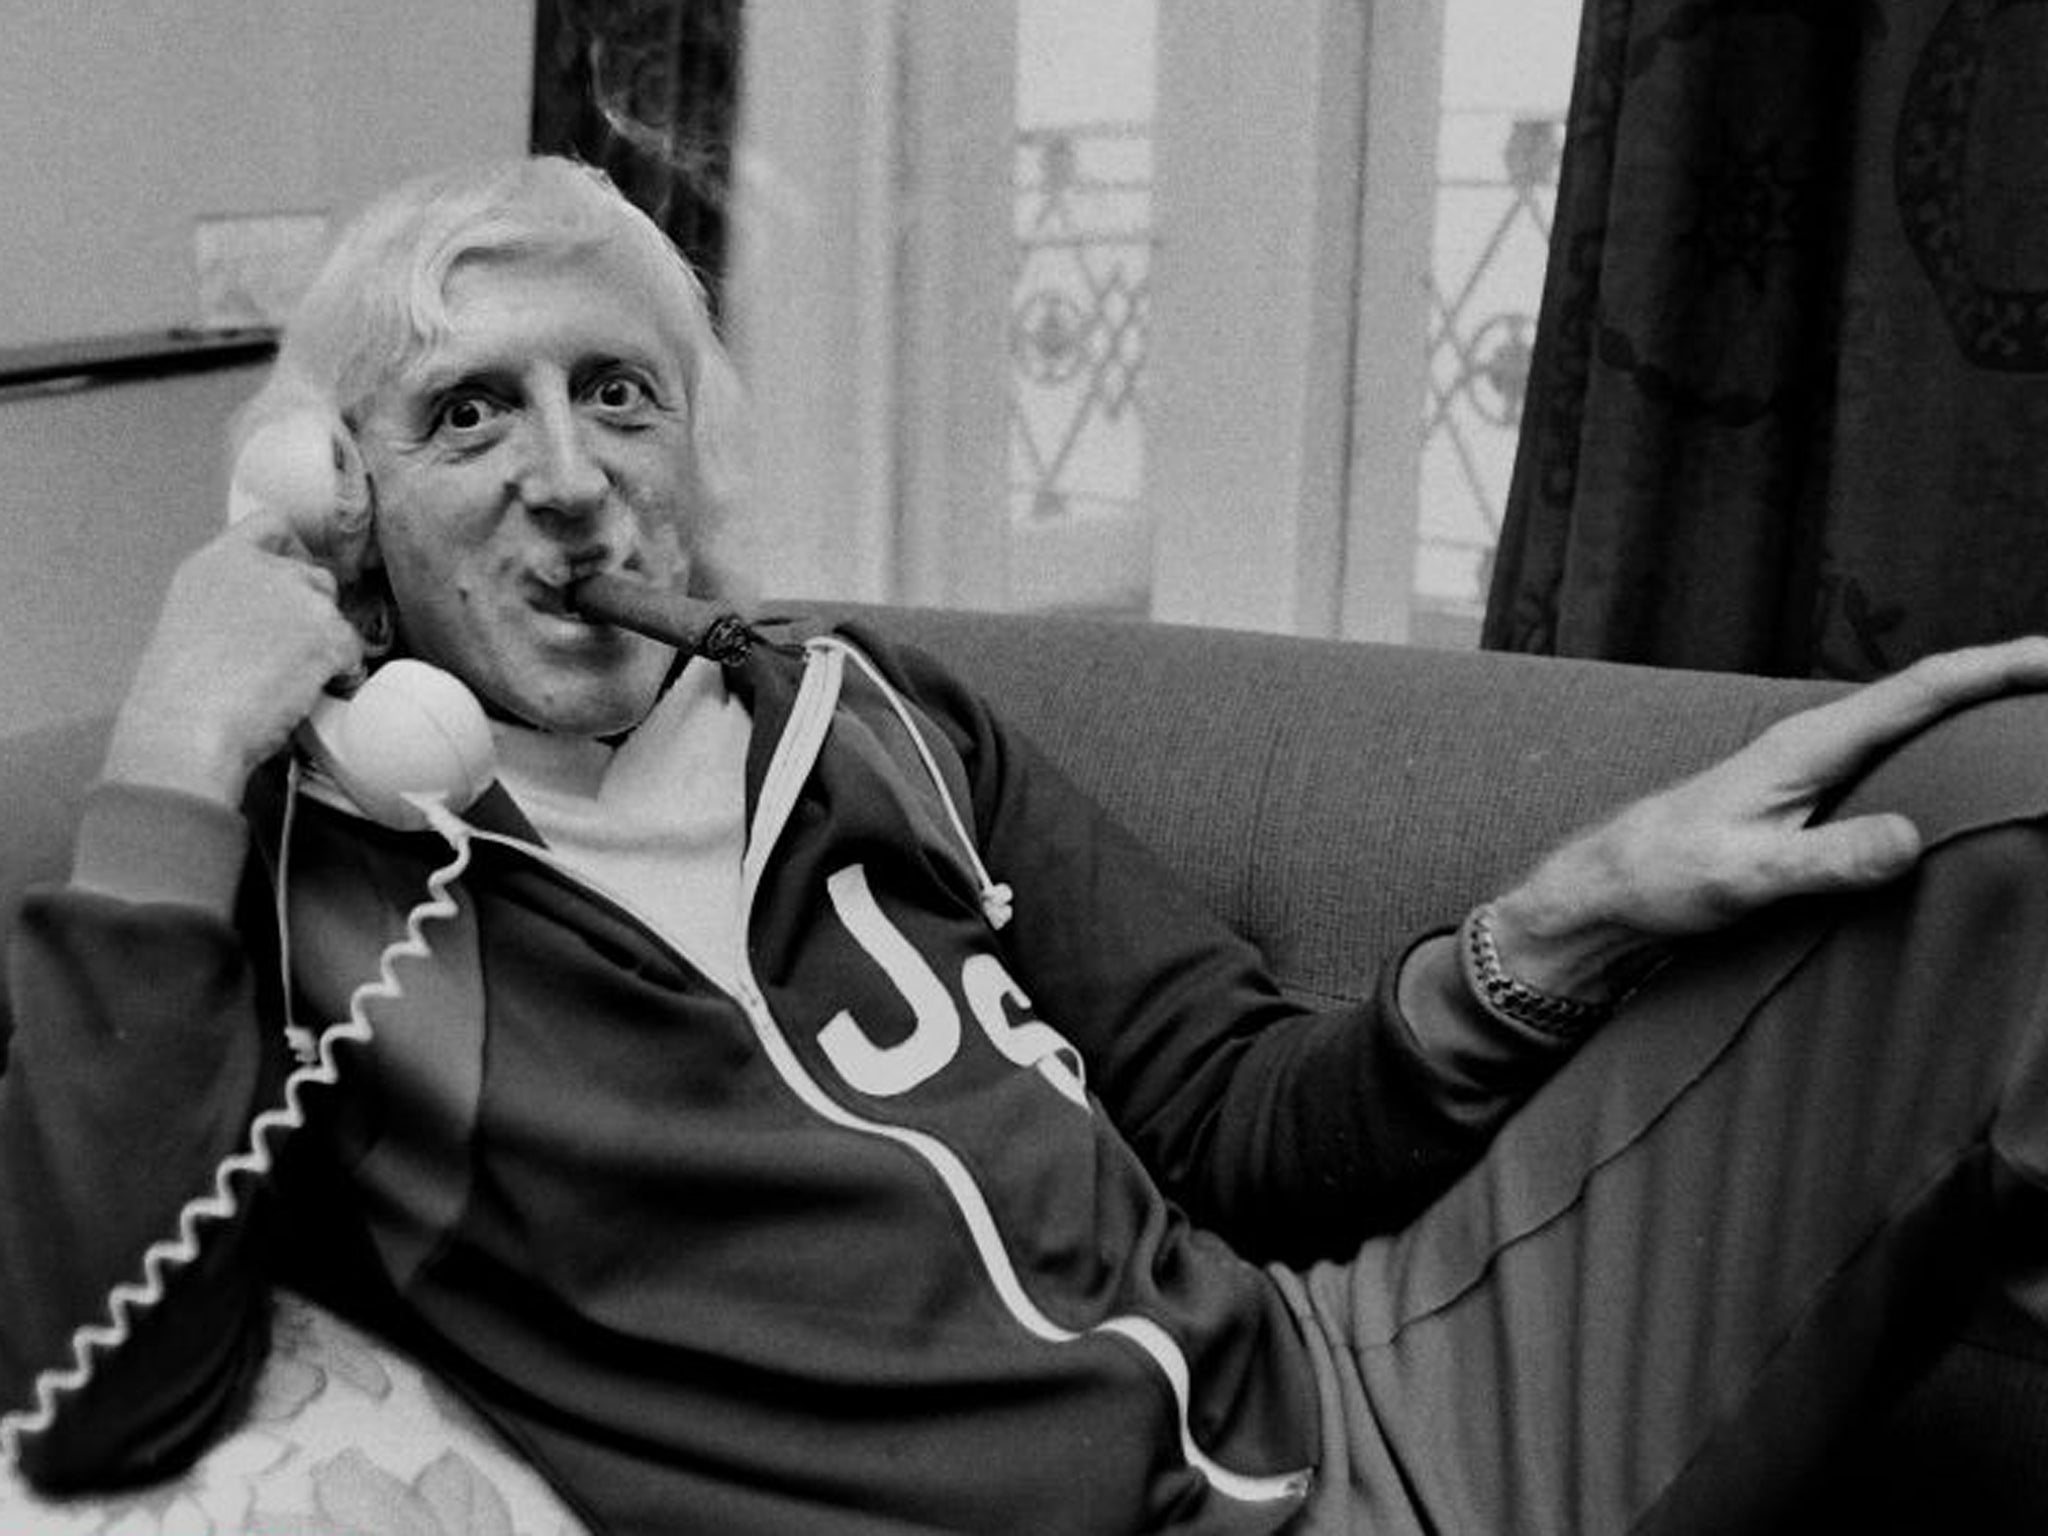 Savile's litany of depraved crimes remained one of Britain's darkest secrets until his death